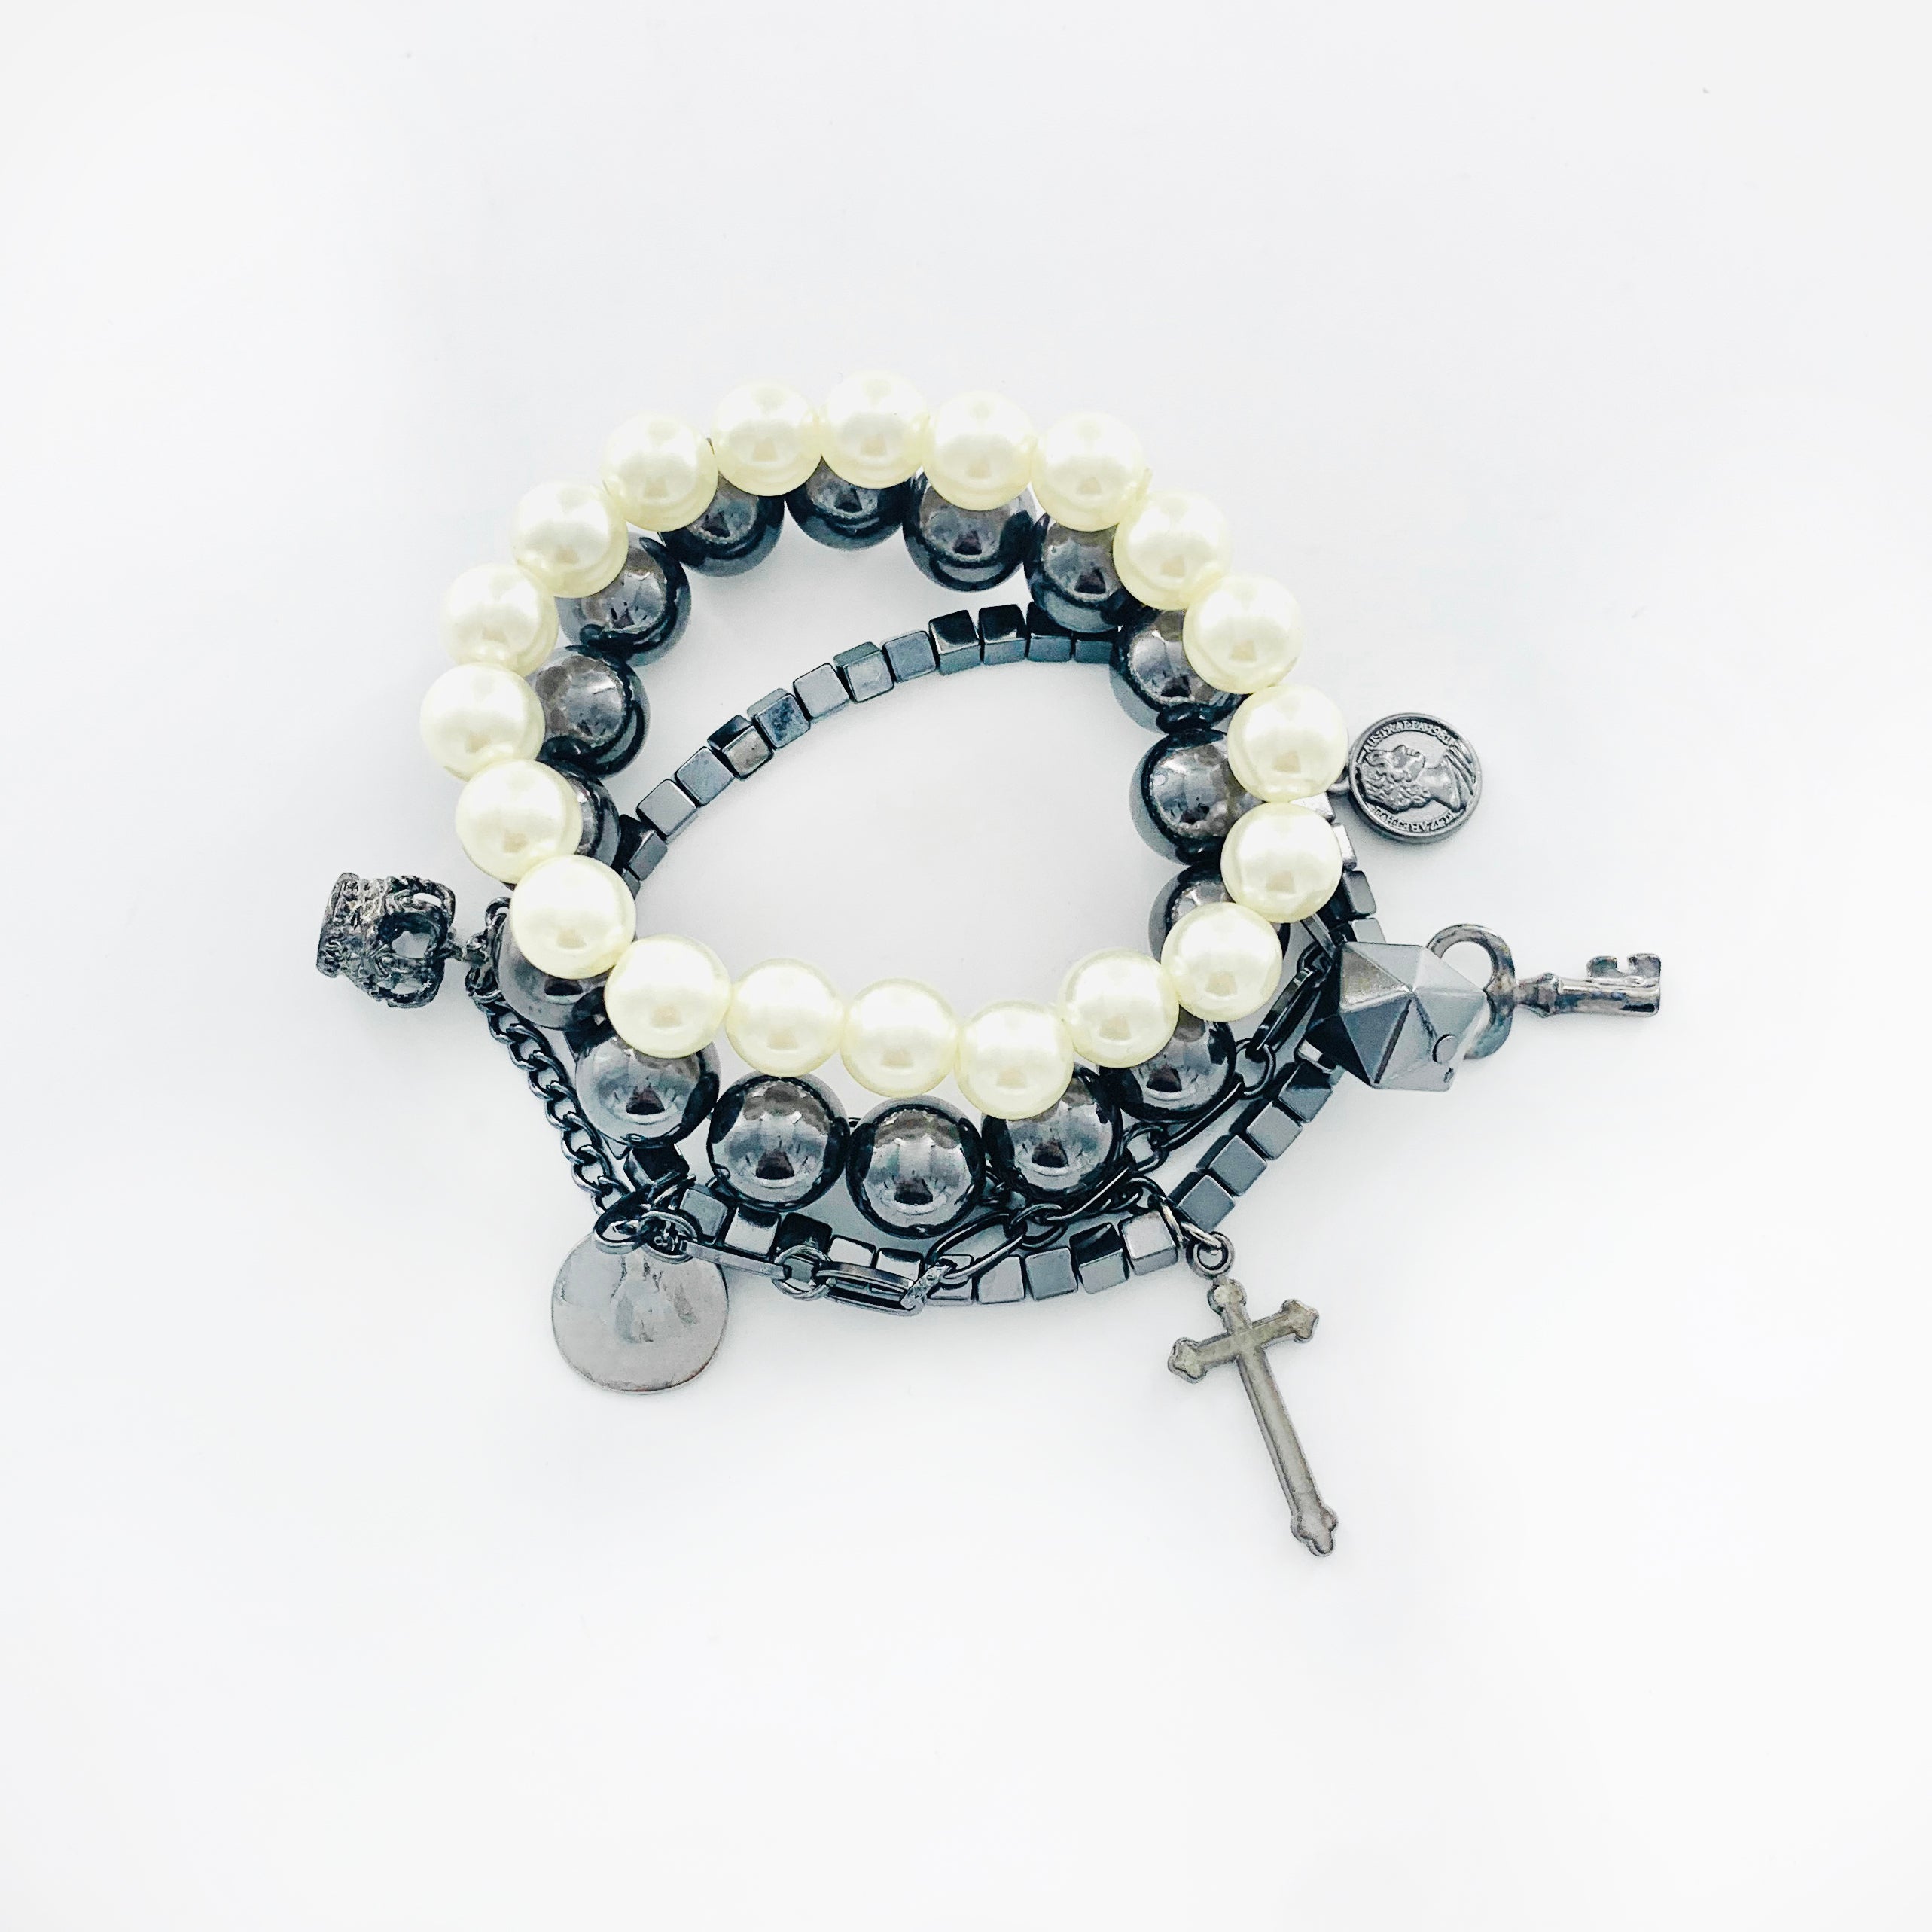 Gunmetal and Pearl bracelets with Cross and Crown charms